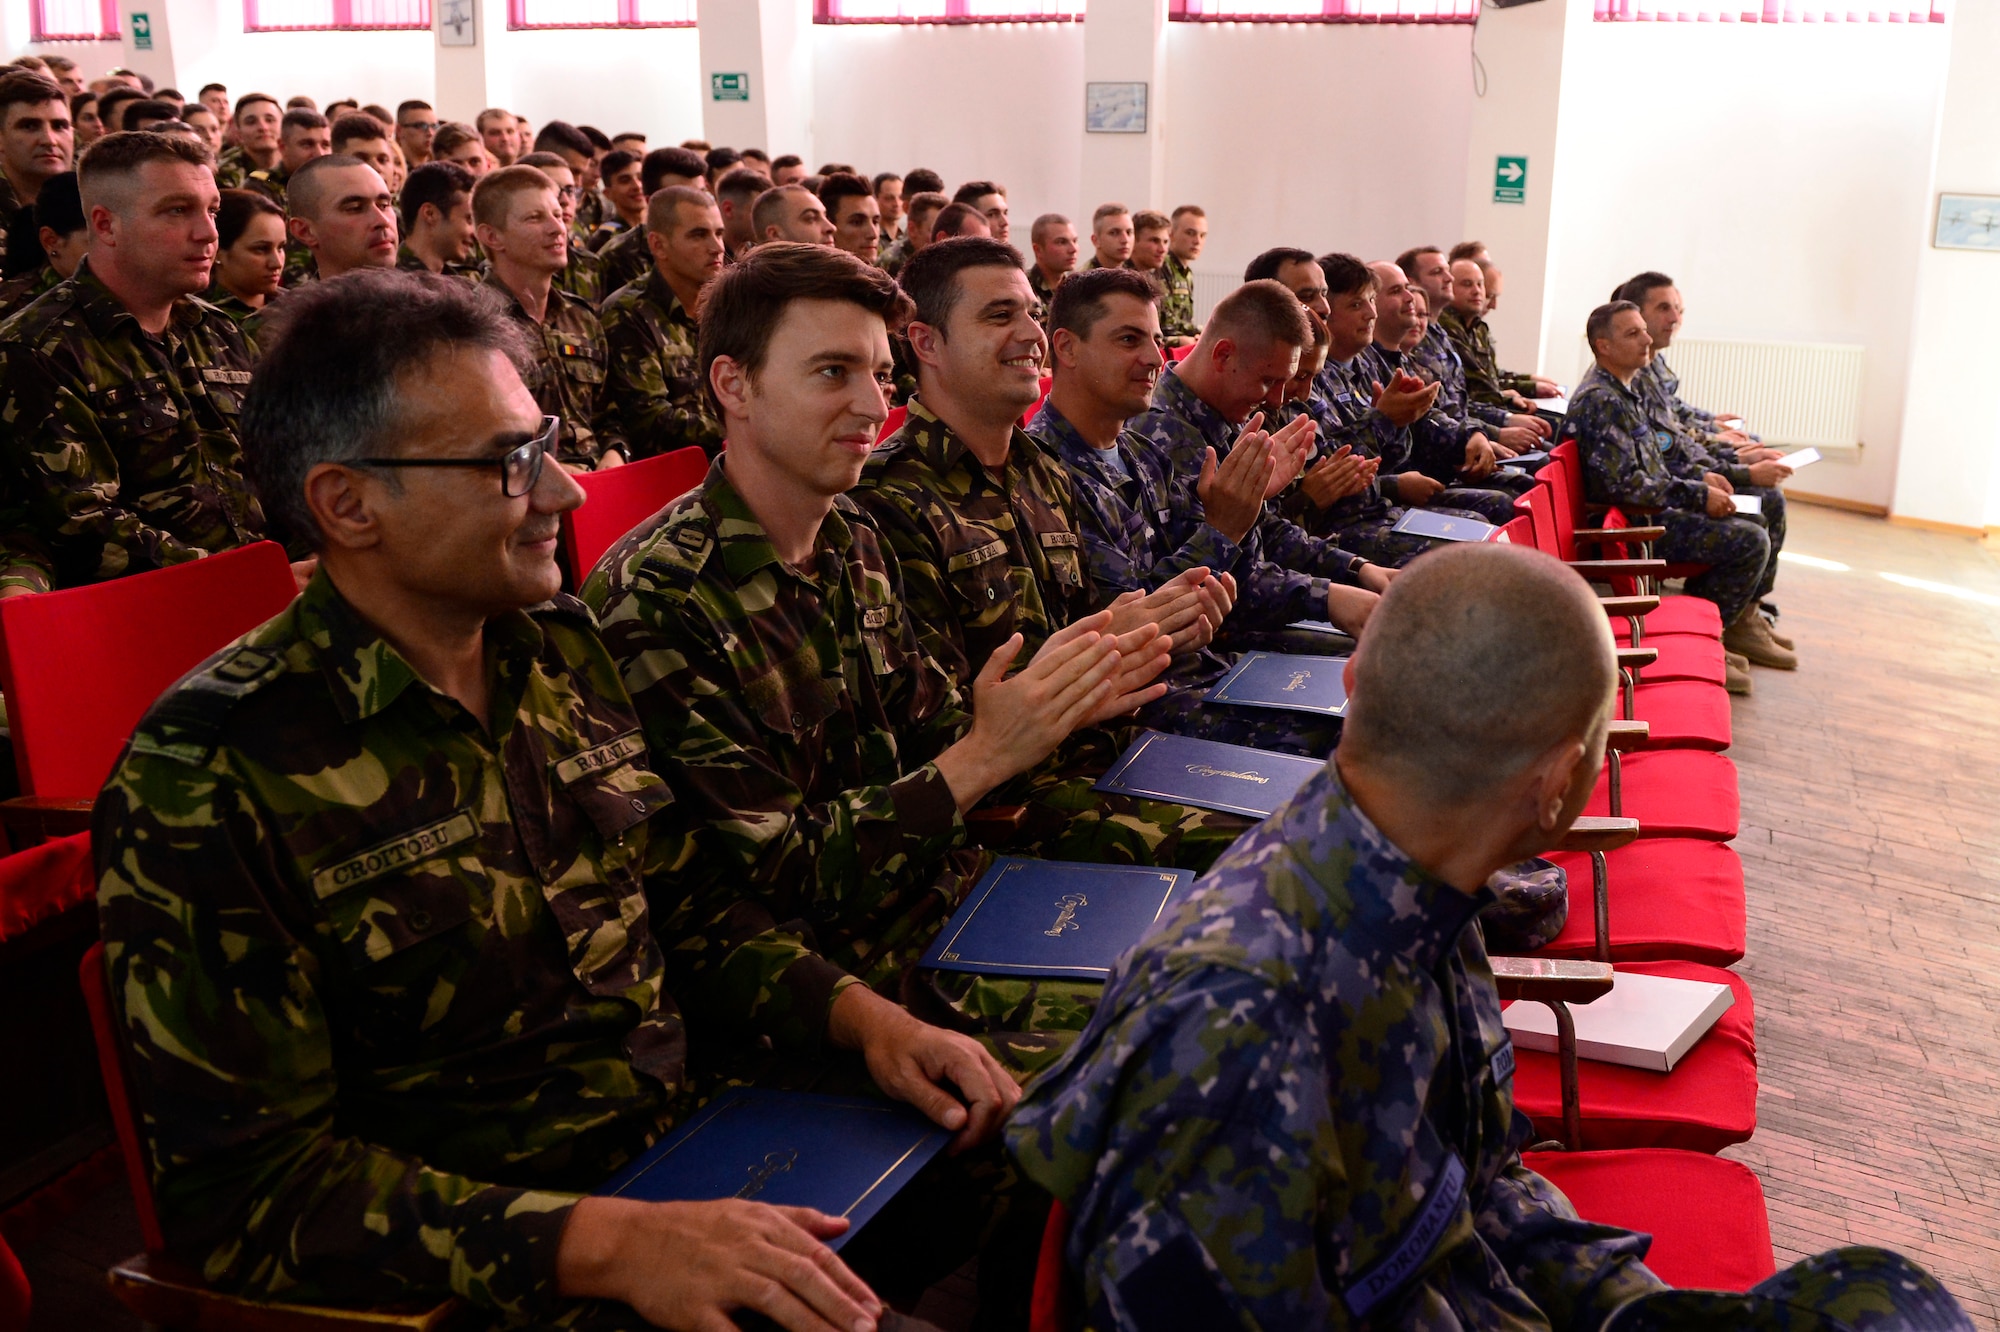 Romanian students celebrate after graduating from the first-ever senior noncommissioned officer mobile education course June 8 to 22, 2018, at Boboc Air Base, in Buzău, Romania. The SNCOA mobile training team partnered with the Inter-European Air Forces Academy to provide a two-week course, condensed from the full five-week course held at Maxwell Air Force Base- Gunter Annex, Alabama. (U.S. Air Force photo by Tech. Sgt. Staci Kasischke)